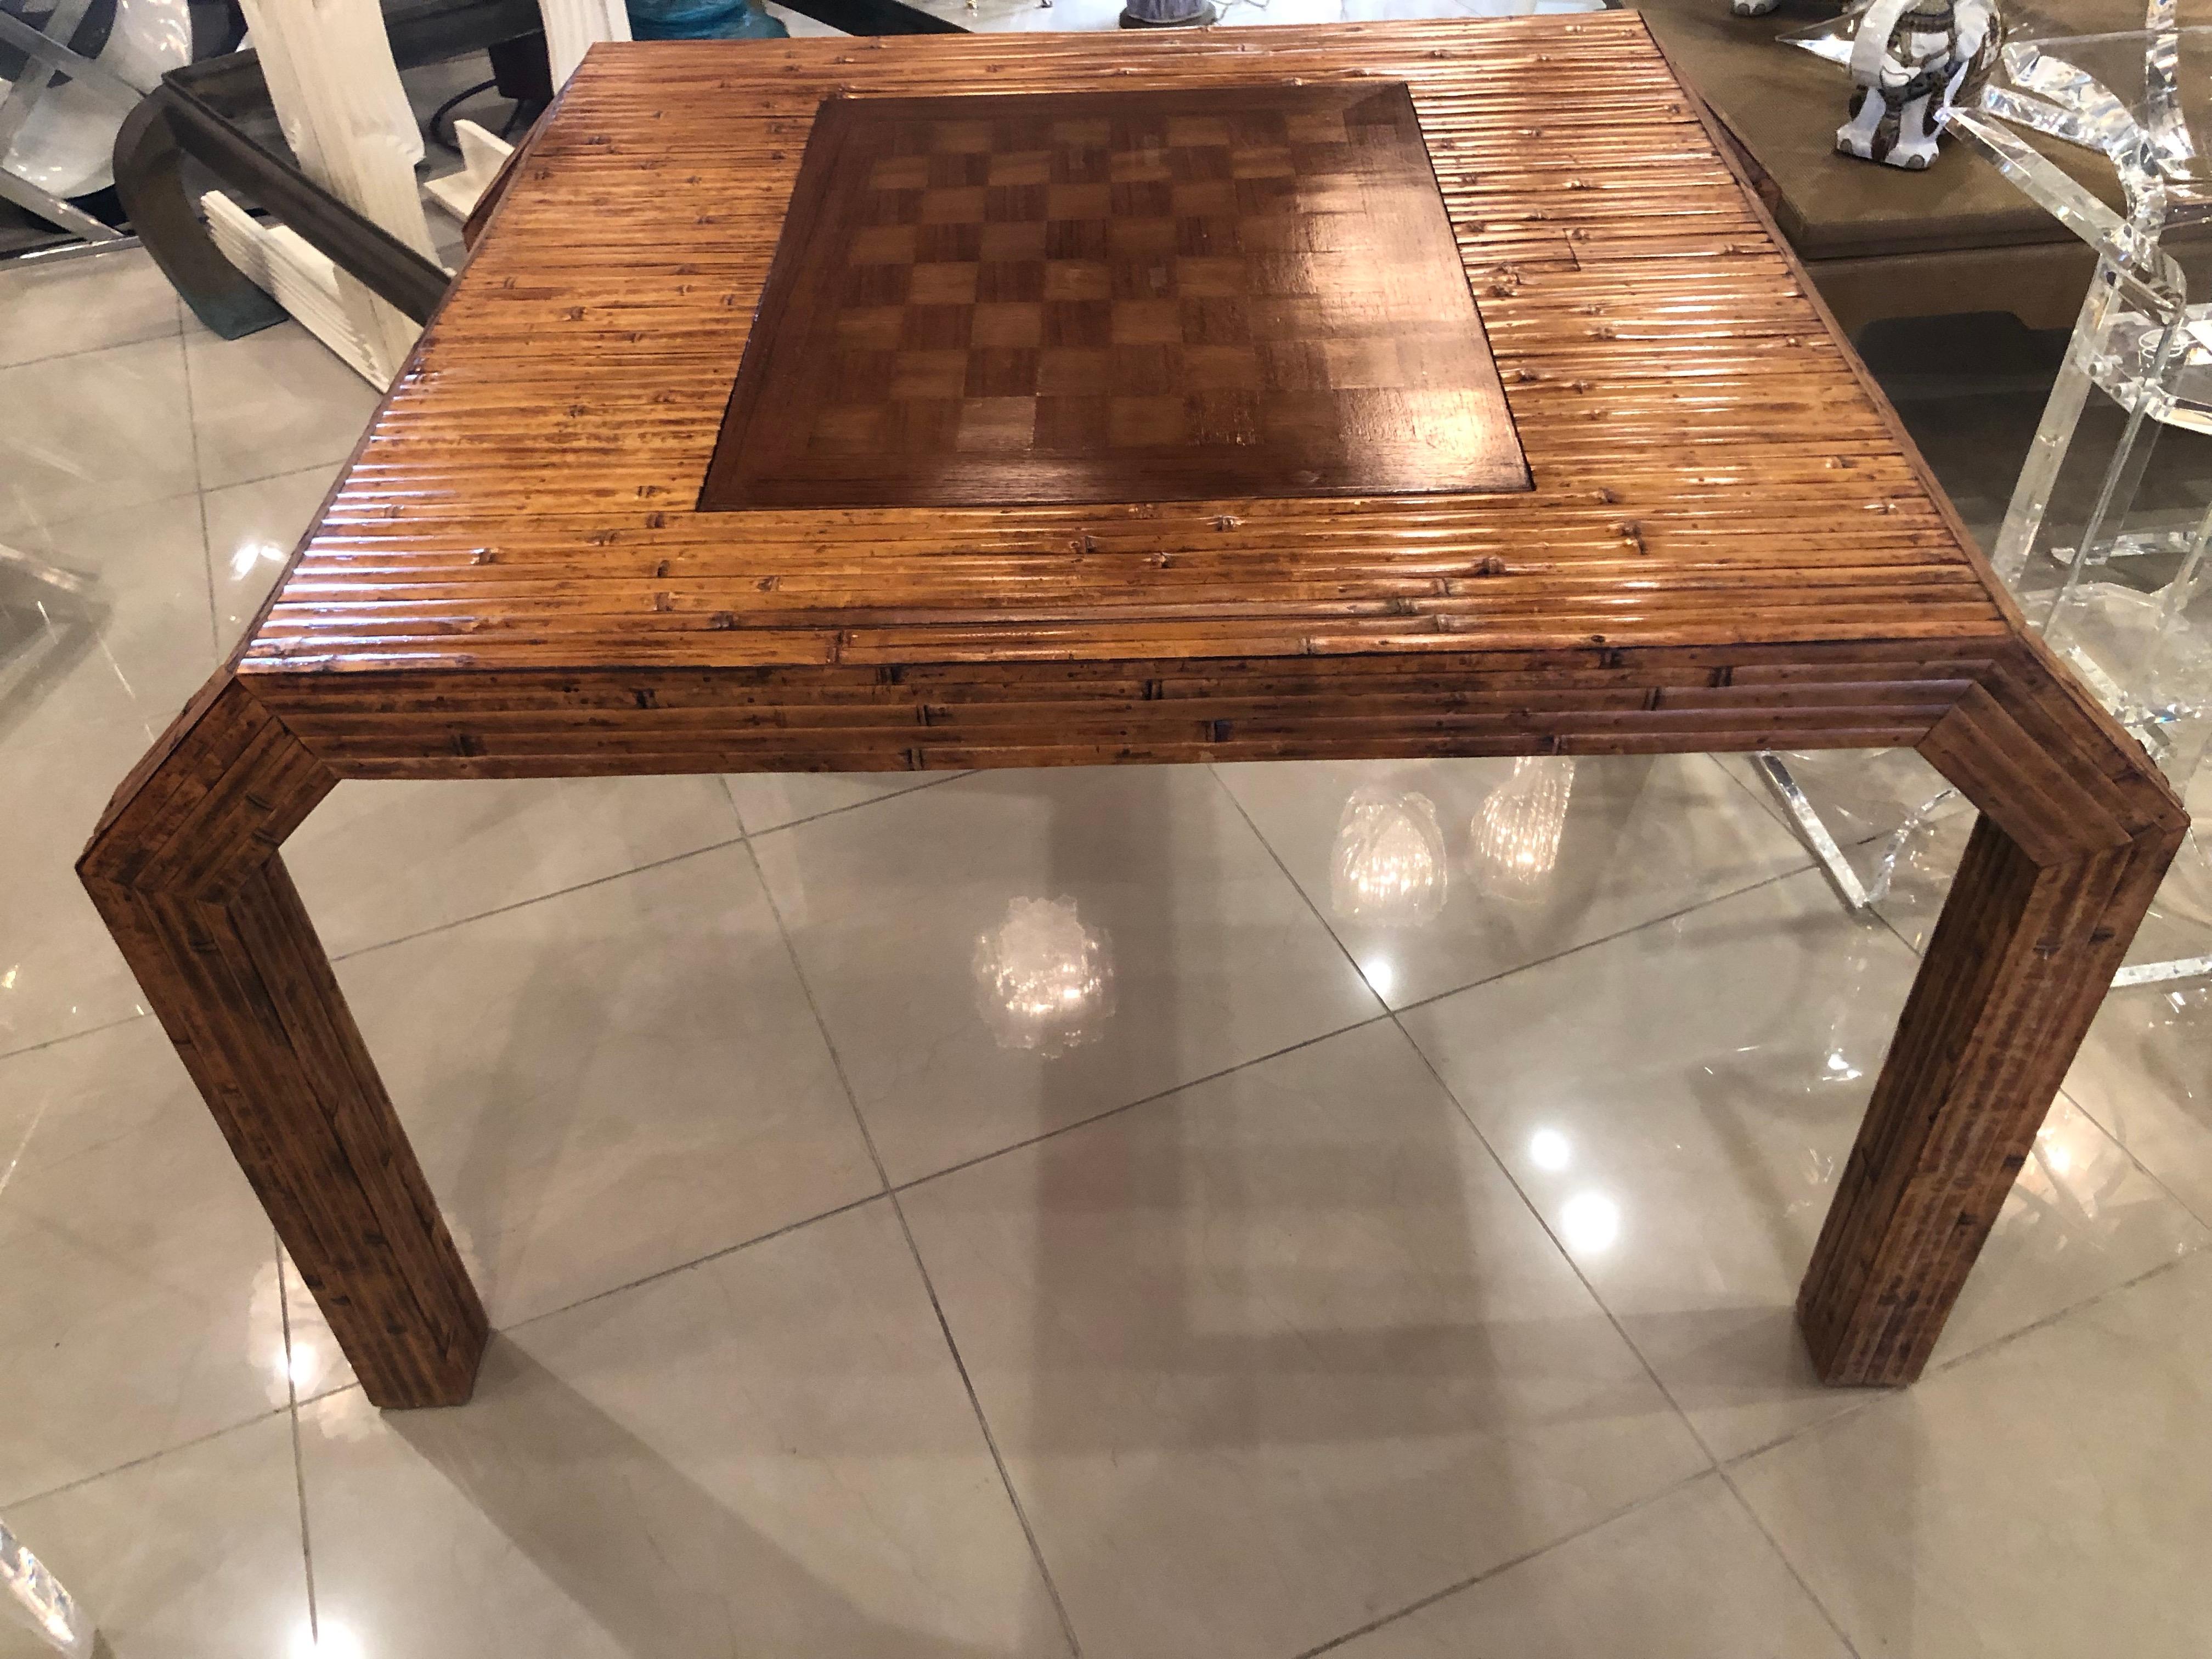 This is such an amazing game table! Lovely bamboo reed flat pieces, incredible flare and detail to the legs give this a fresh modern look. The game board piece can actually flip over so that the table can be used for dining and an everyday look